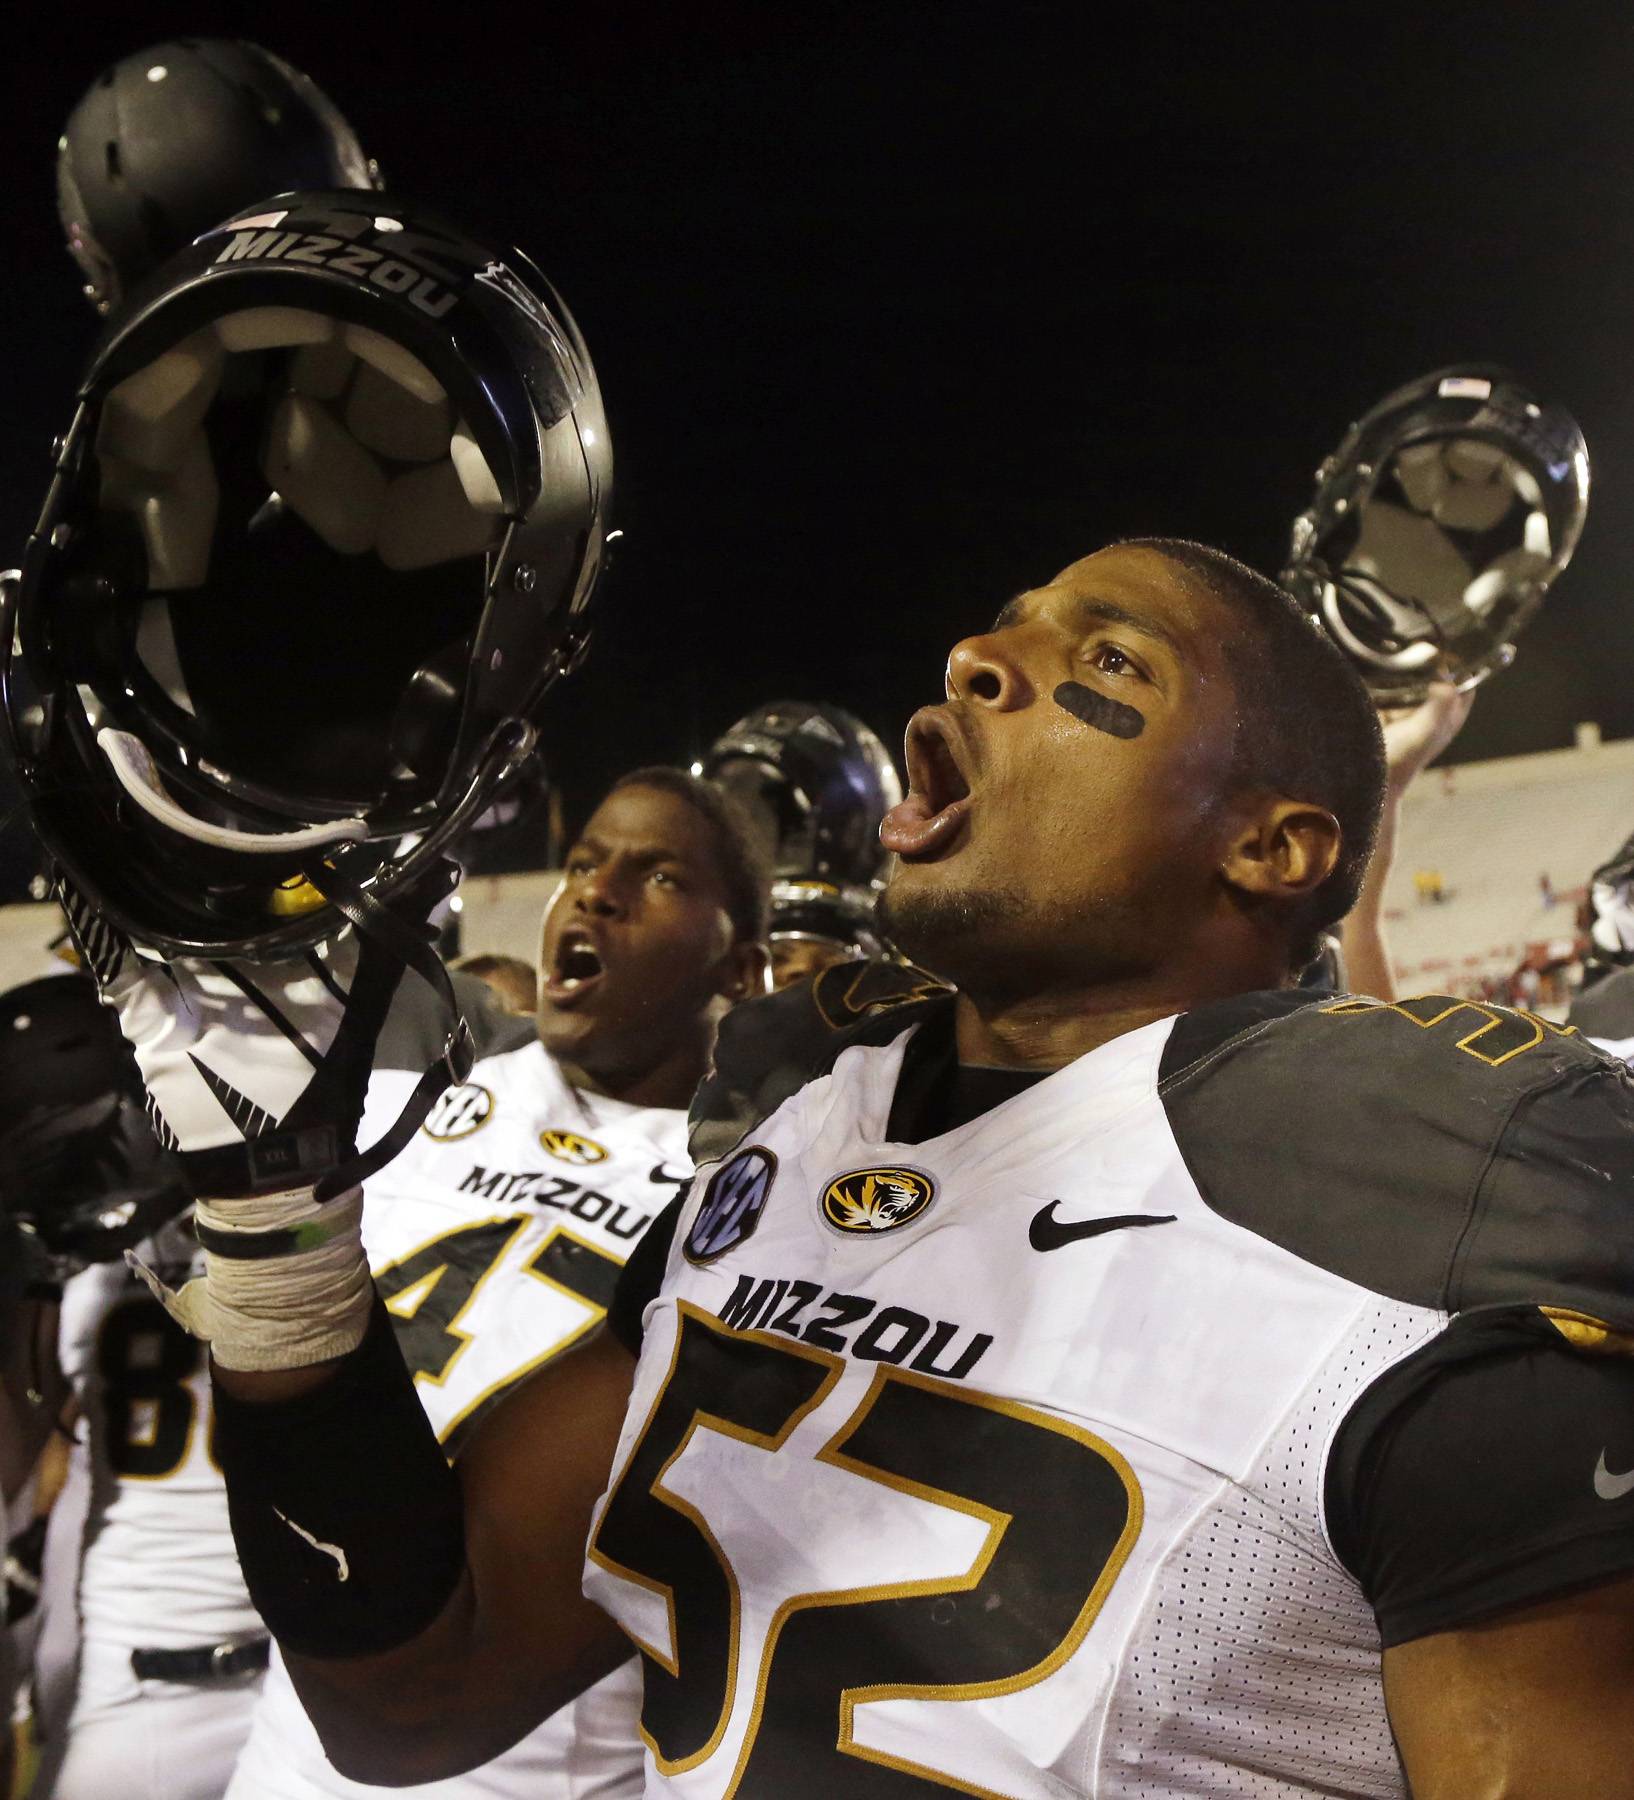 Michael Sam - About two months ago, Michael Sam (player for the Missouri Tigers) decided to out himself. The best part about this is that Sam looks to be picked as a potential star in the upcoming NFL draft.&nbsp;(Photo: Darron Cummings/AP Photo, File)